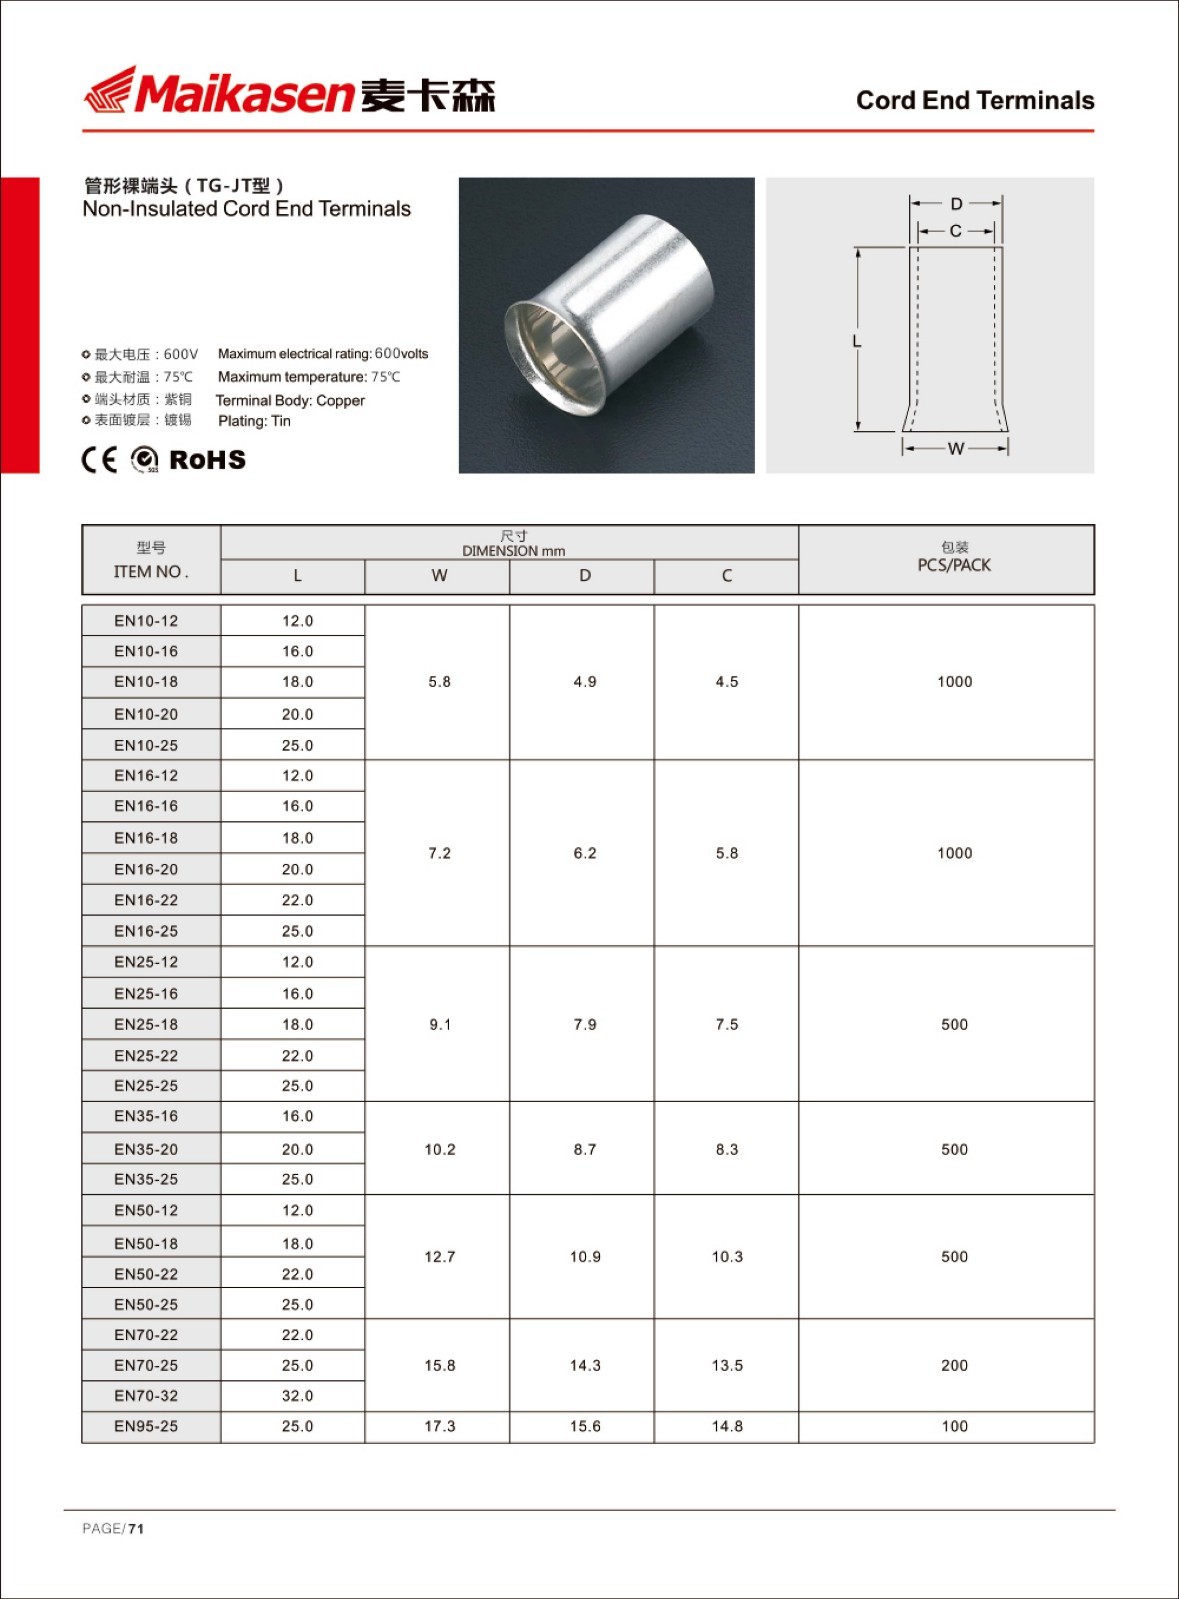 MKS battery terminals supplier for industrial